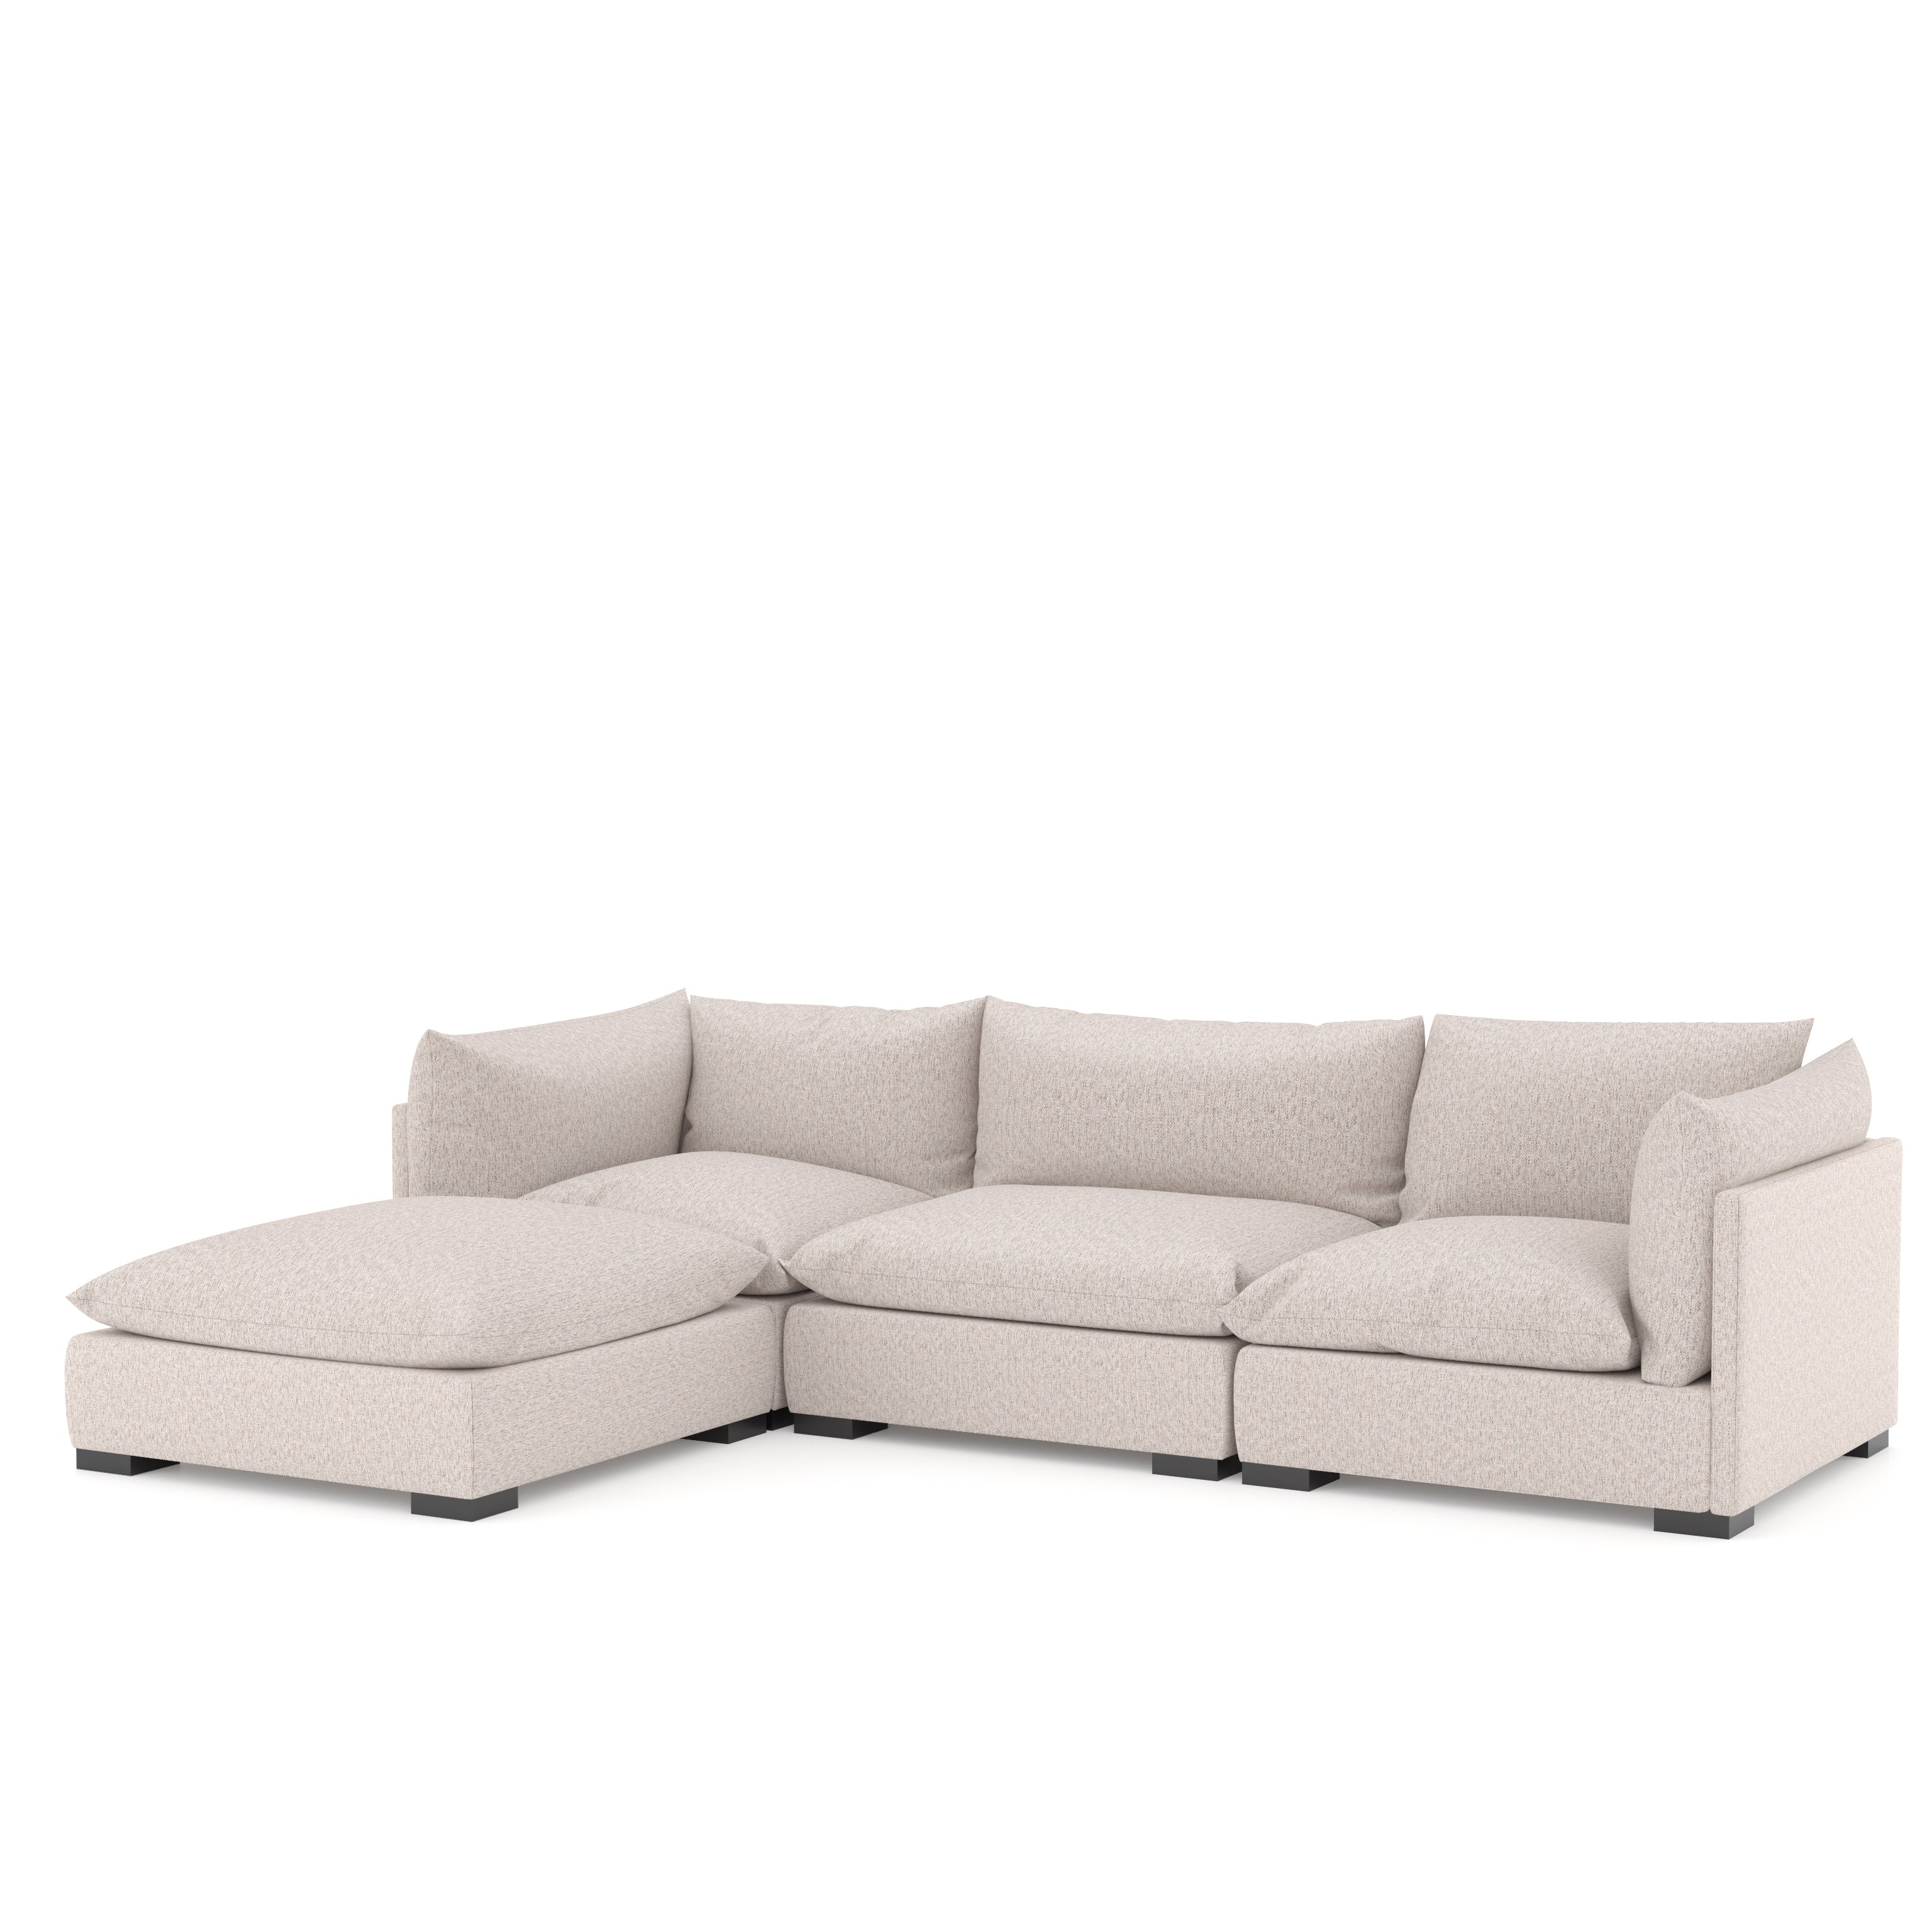 Webster 3-Piece Sectional with Ottoman